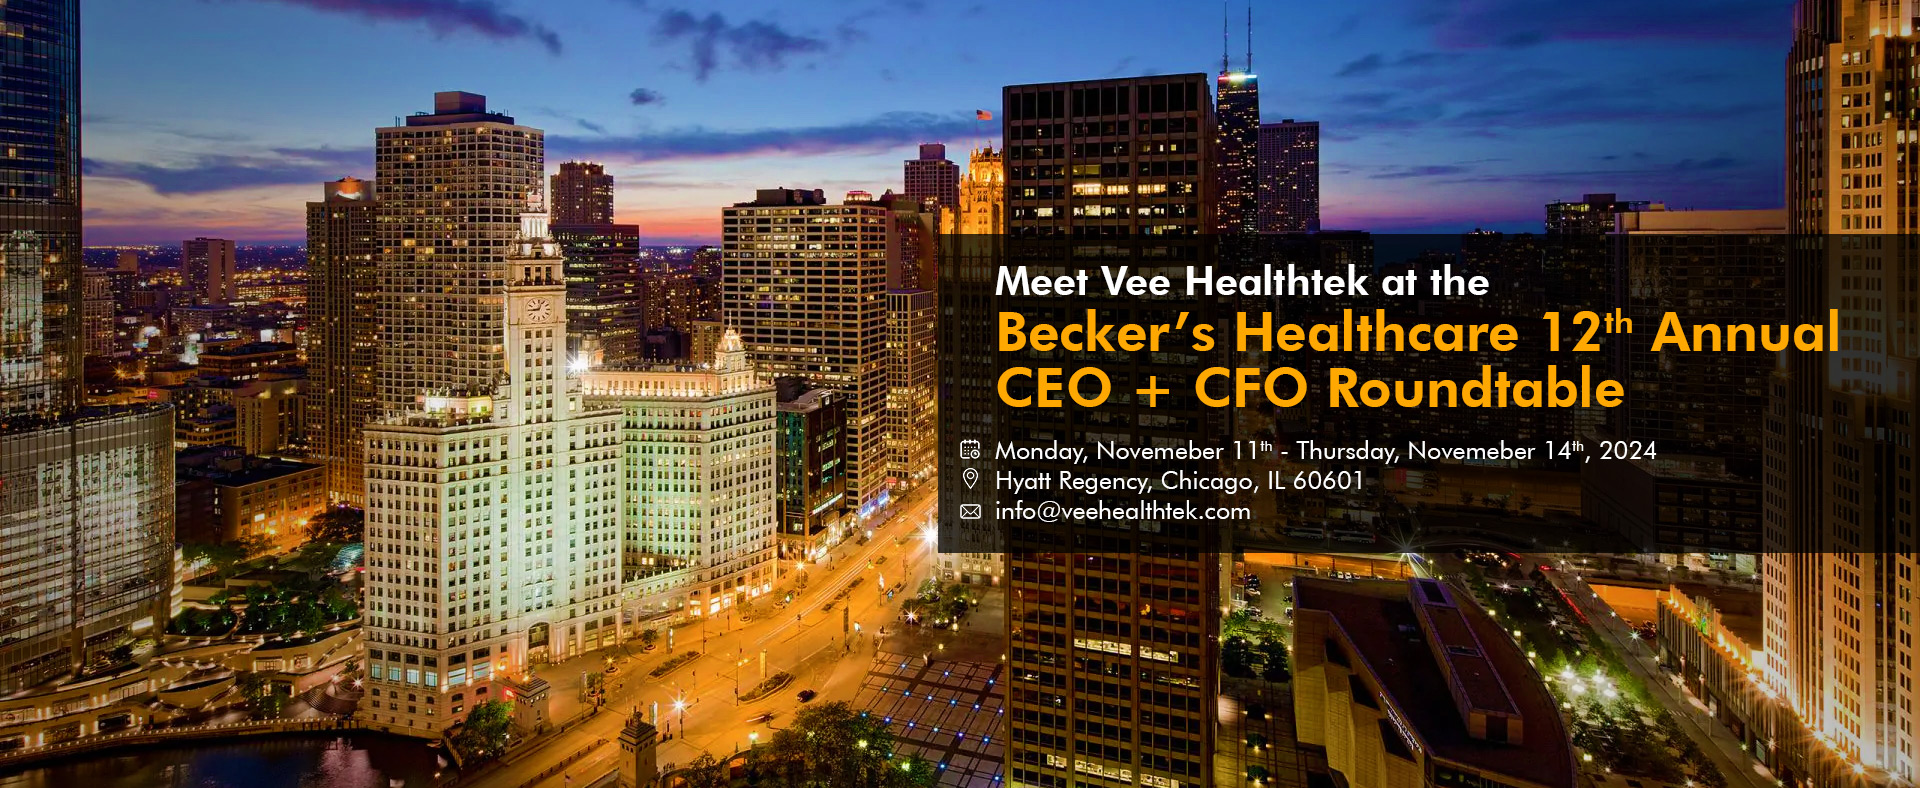 Becker's Healthcare 12th Annual CEO + CFO Roundtable